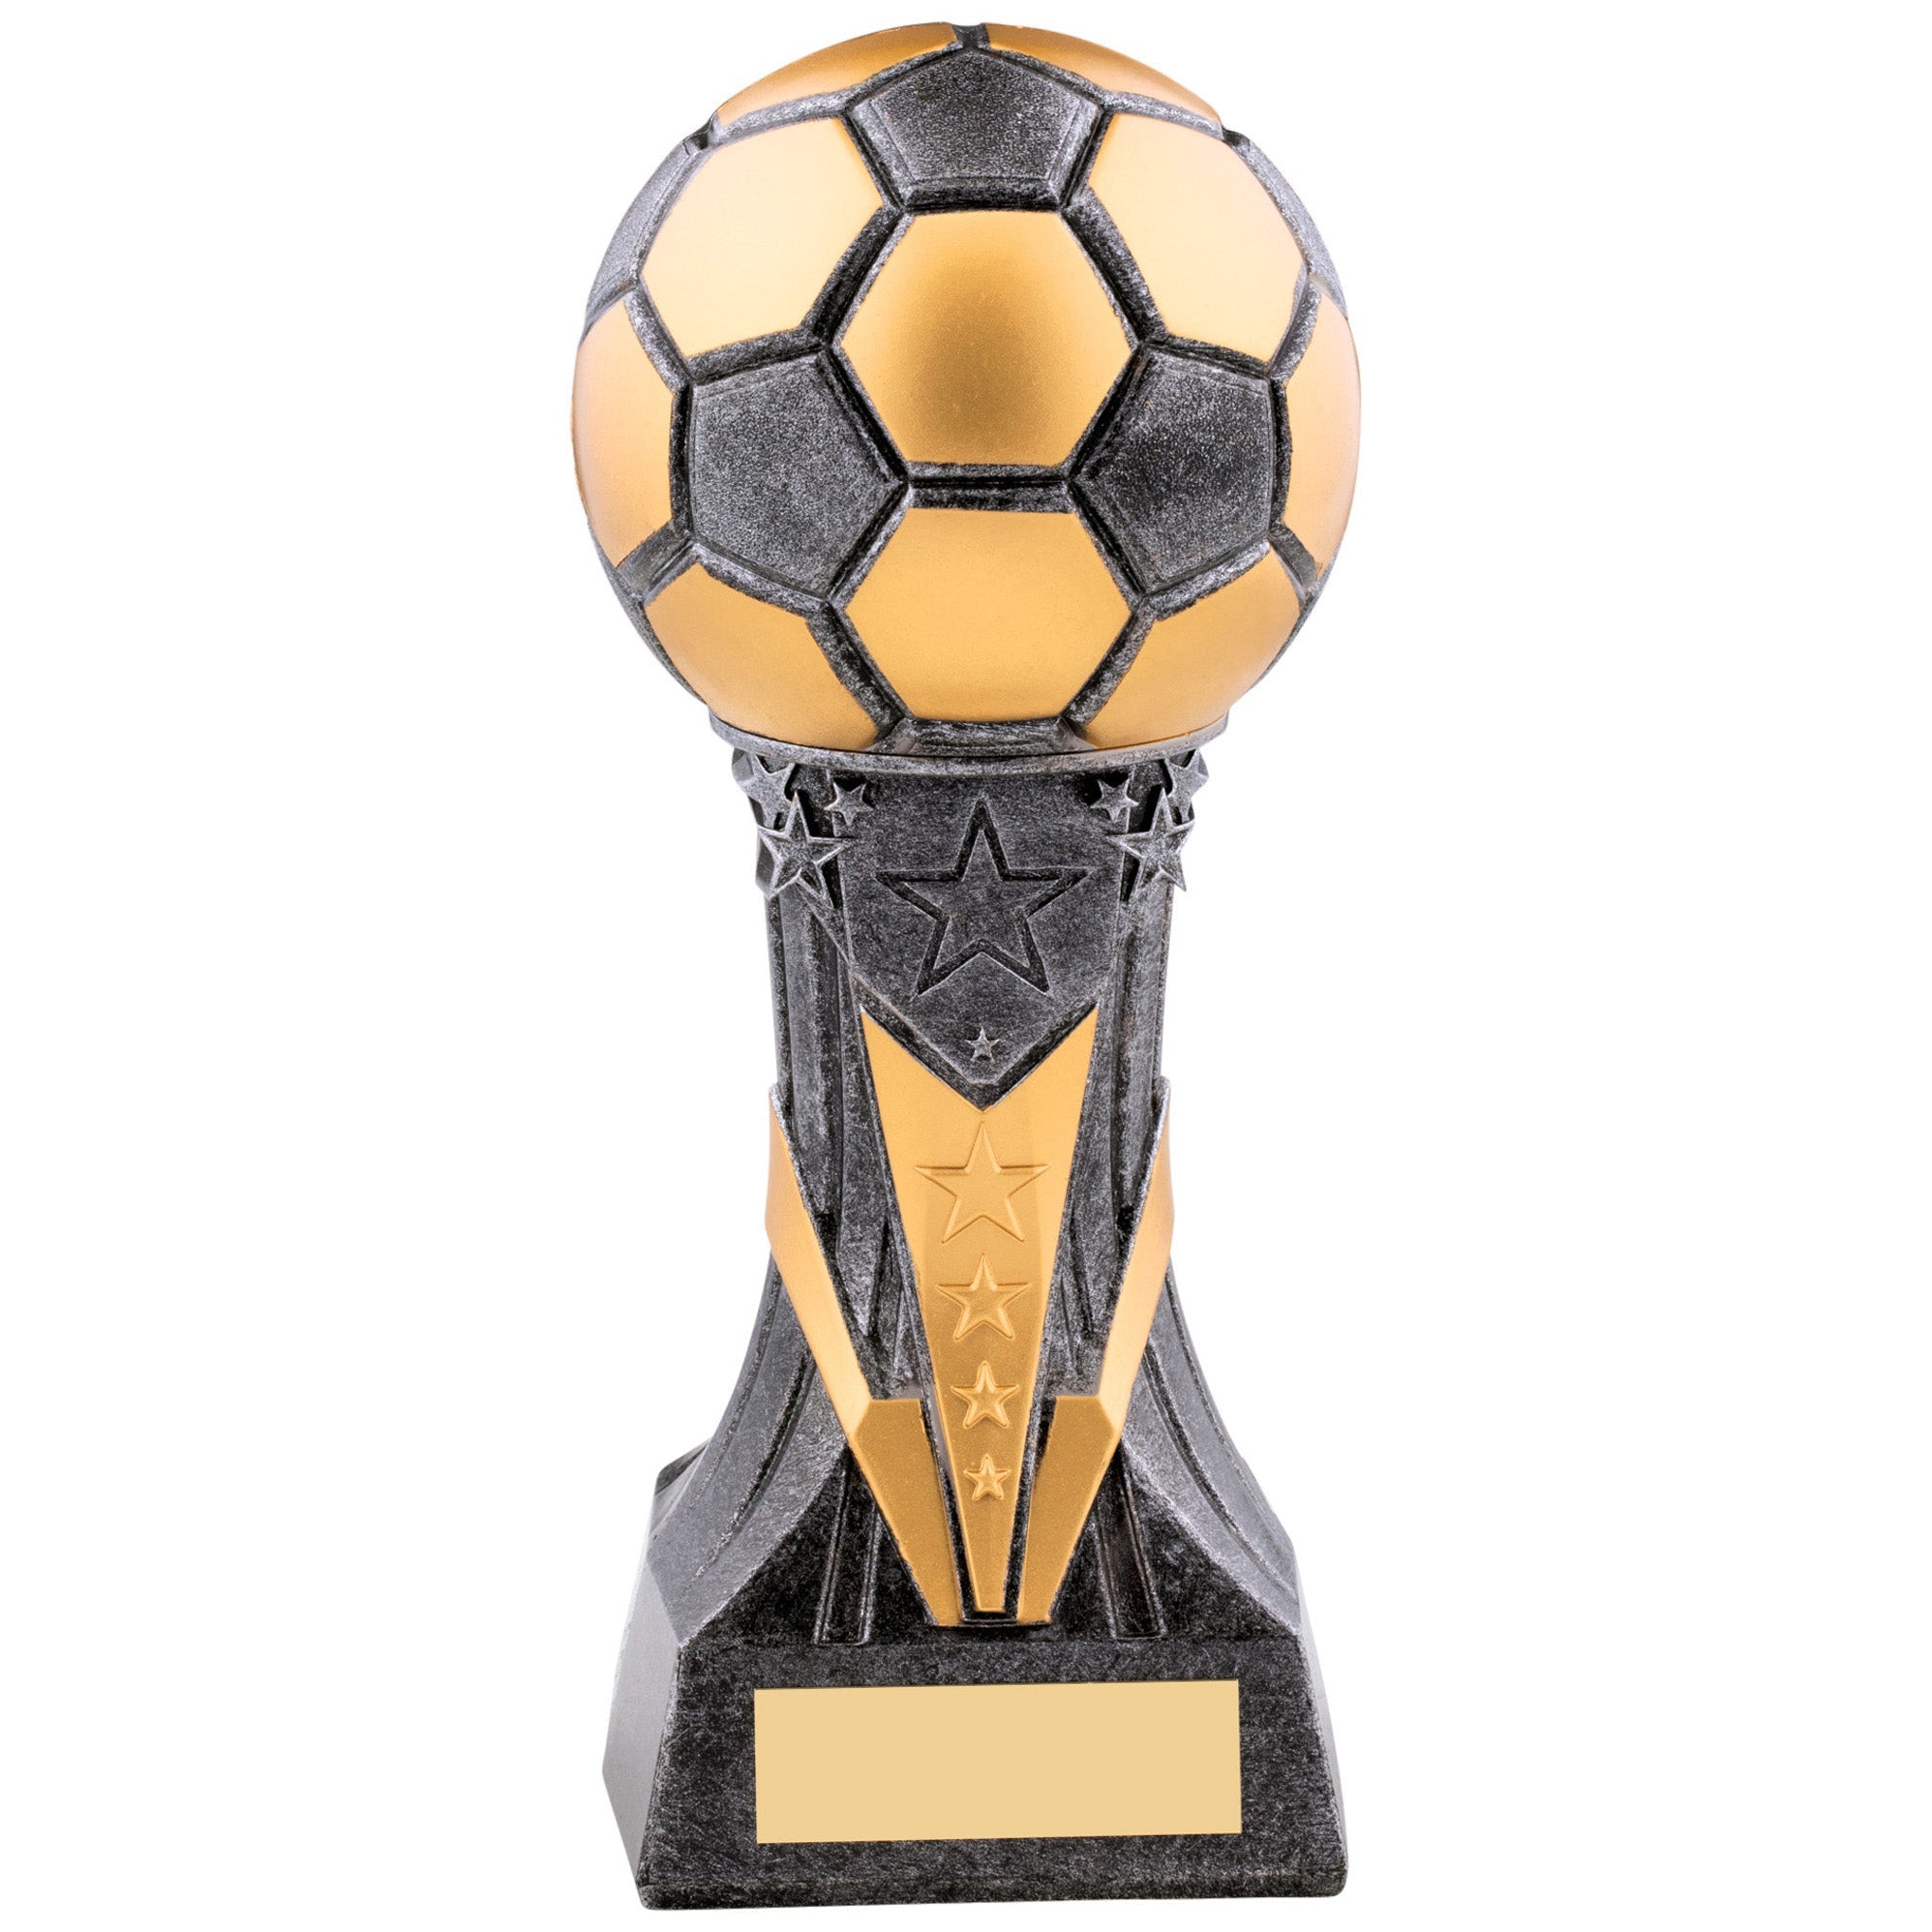 7.5" Cosmos Football Trophy (CLEARANCE)